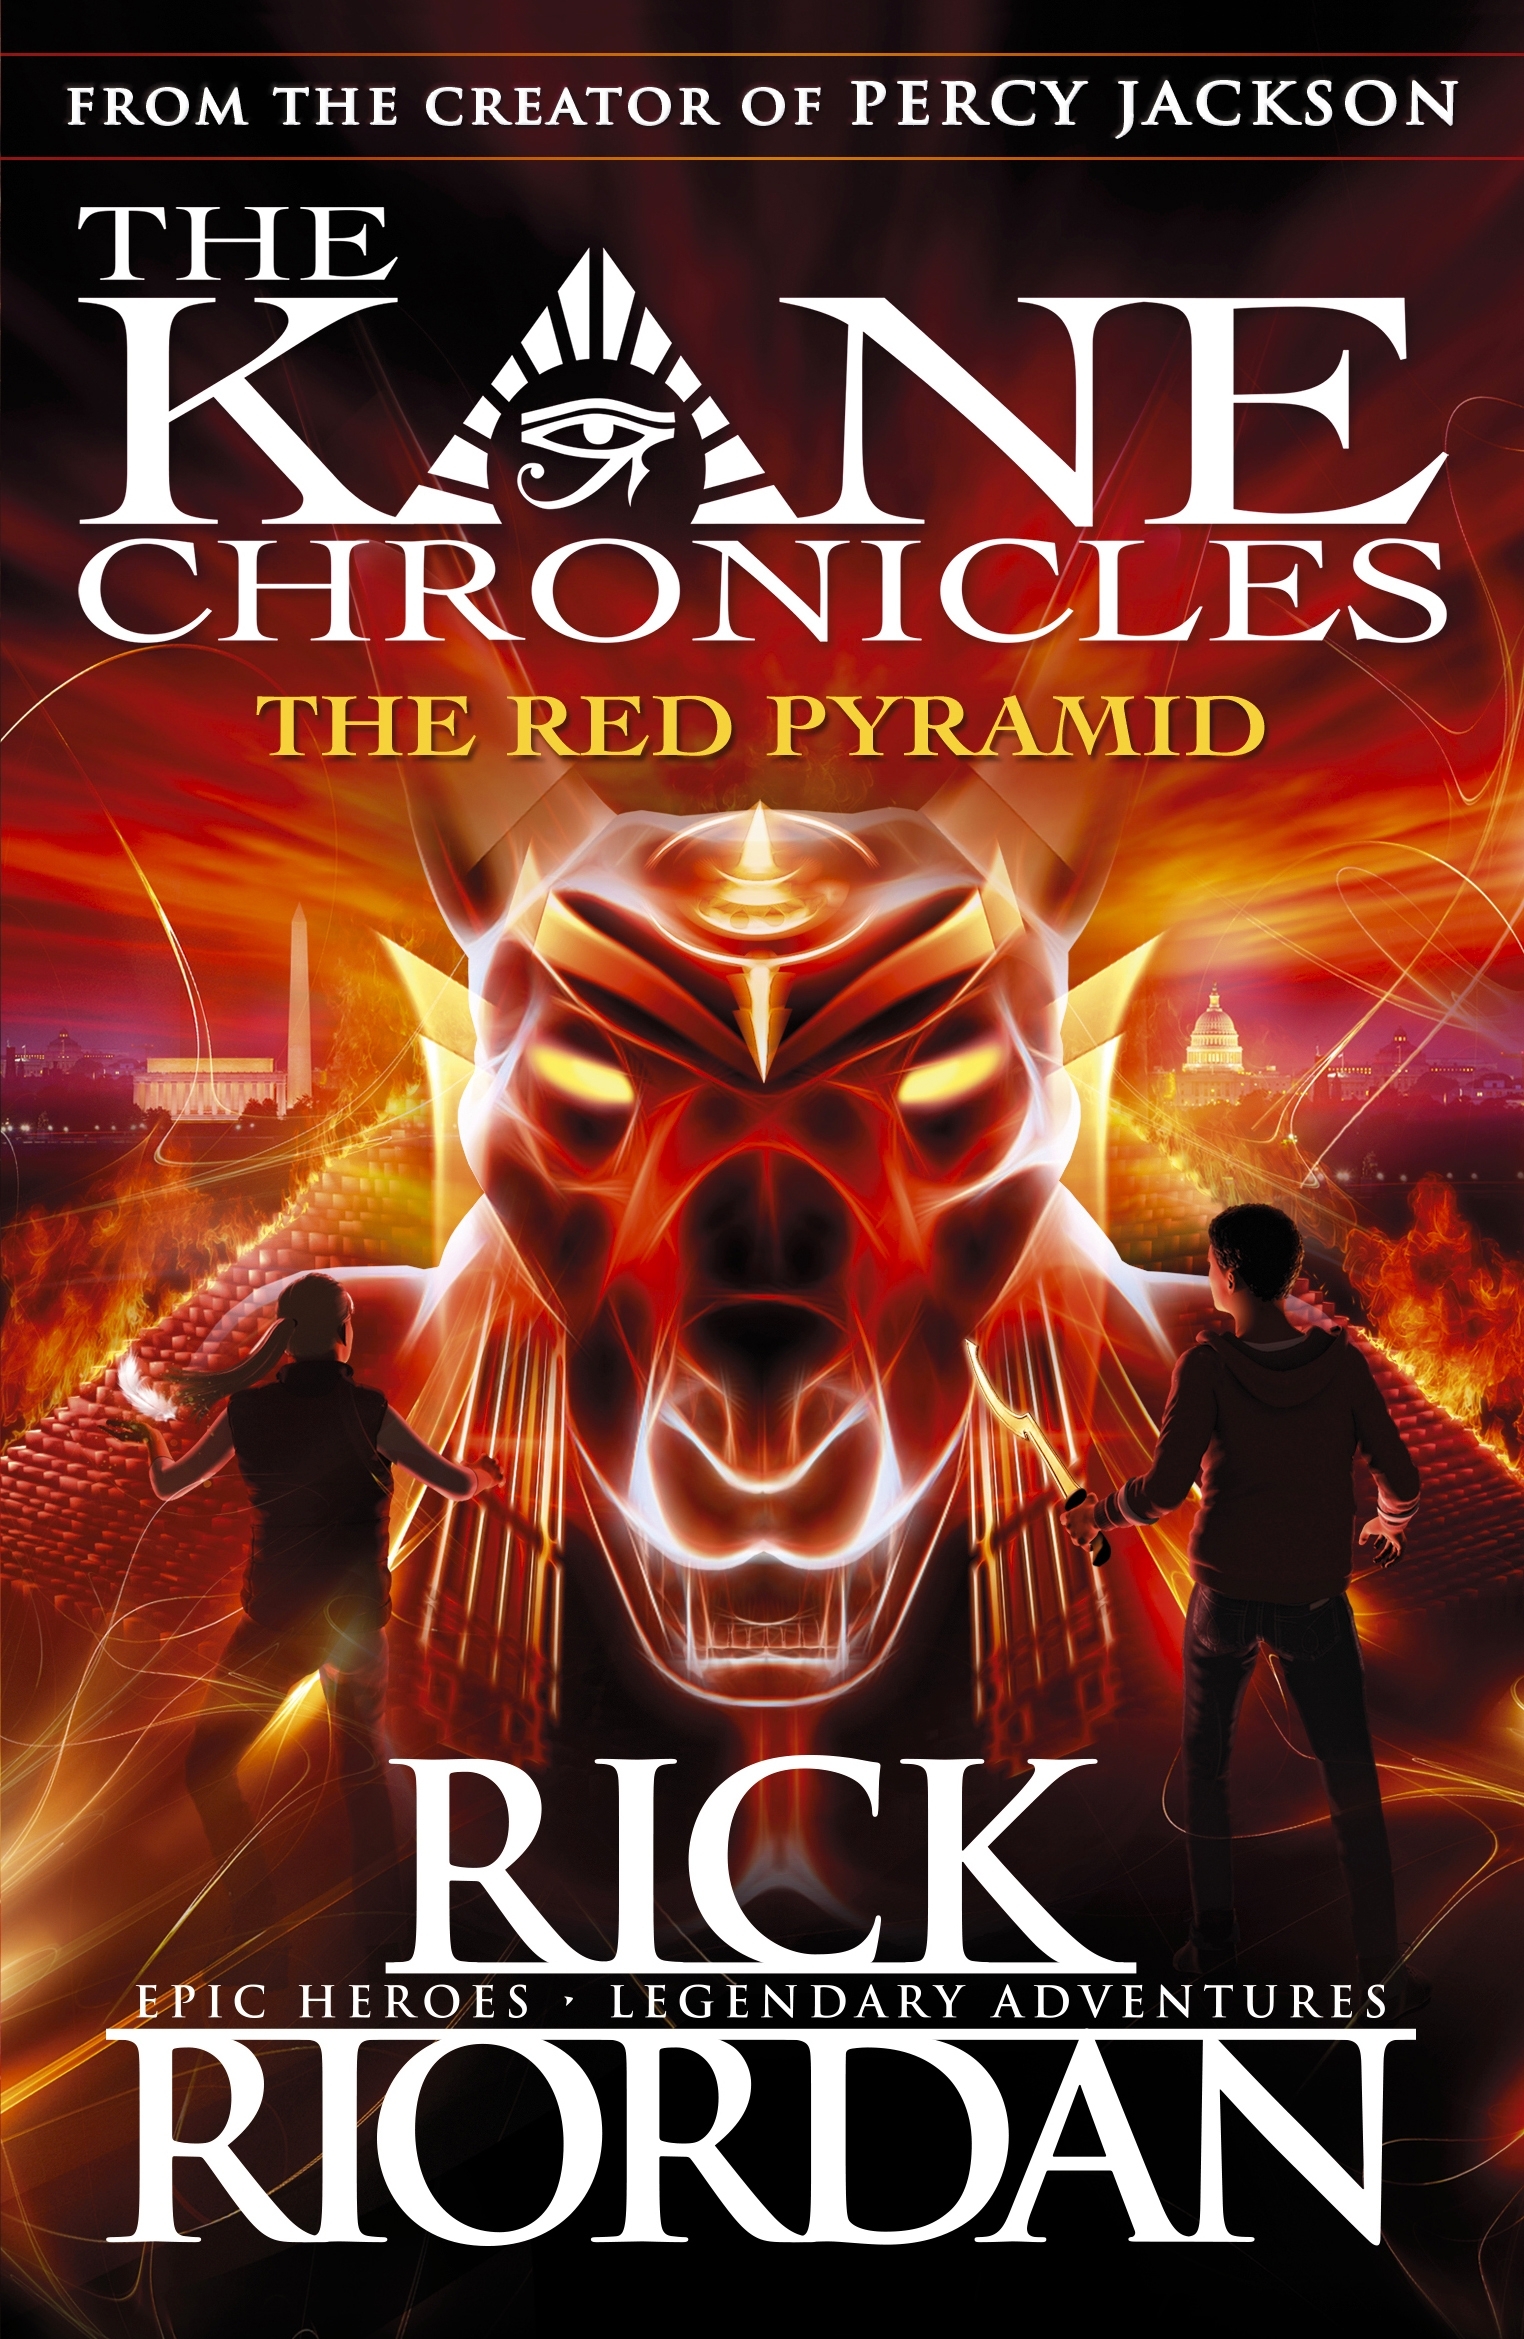 The image shows the cover of a children's novel: The Red Pyramid, book 1 in The Kane Chronicles series by Rick Riordan.